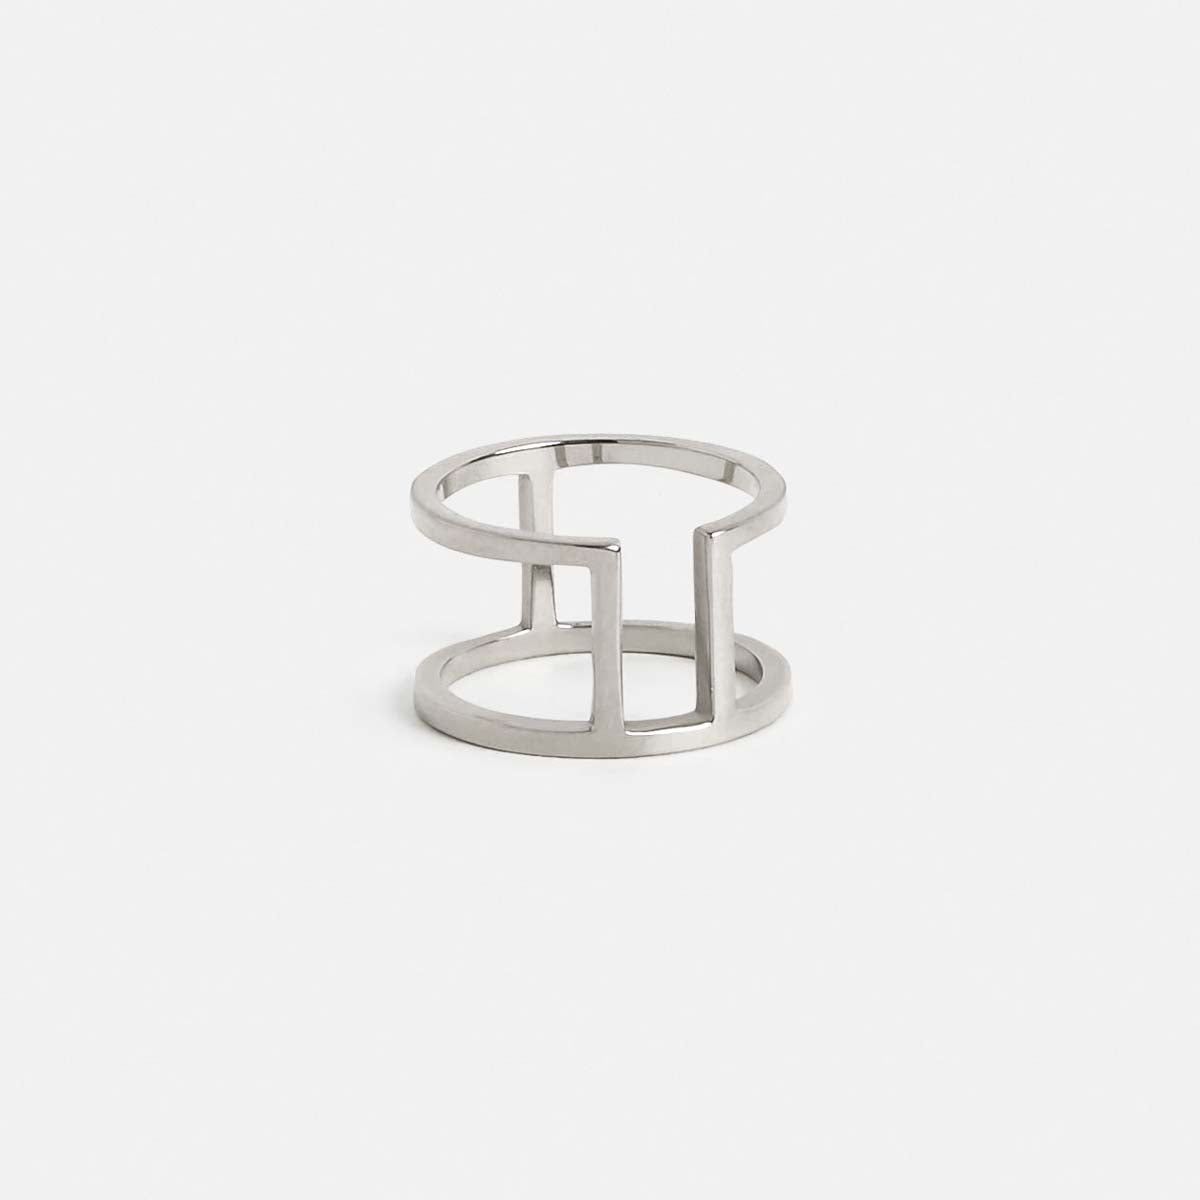 Cote Unusual Ring in 14k White Gold by SHW Fine Jewelry NYC